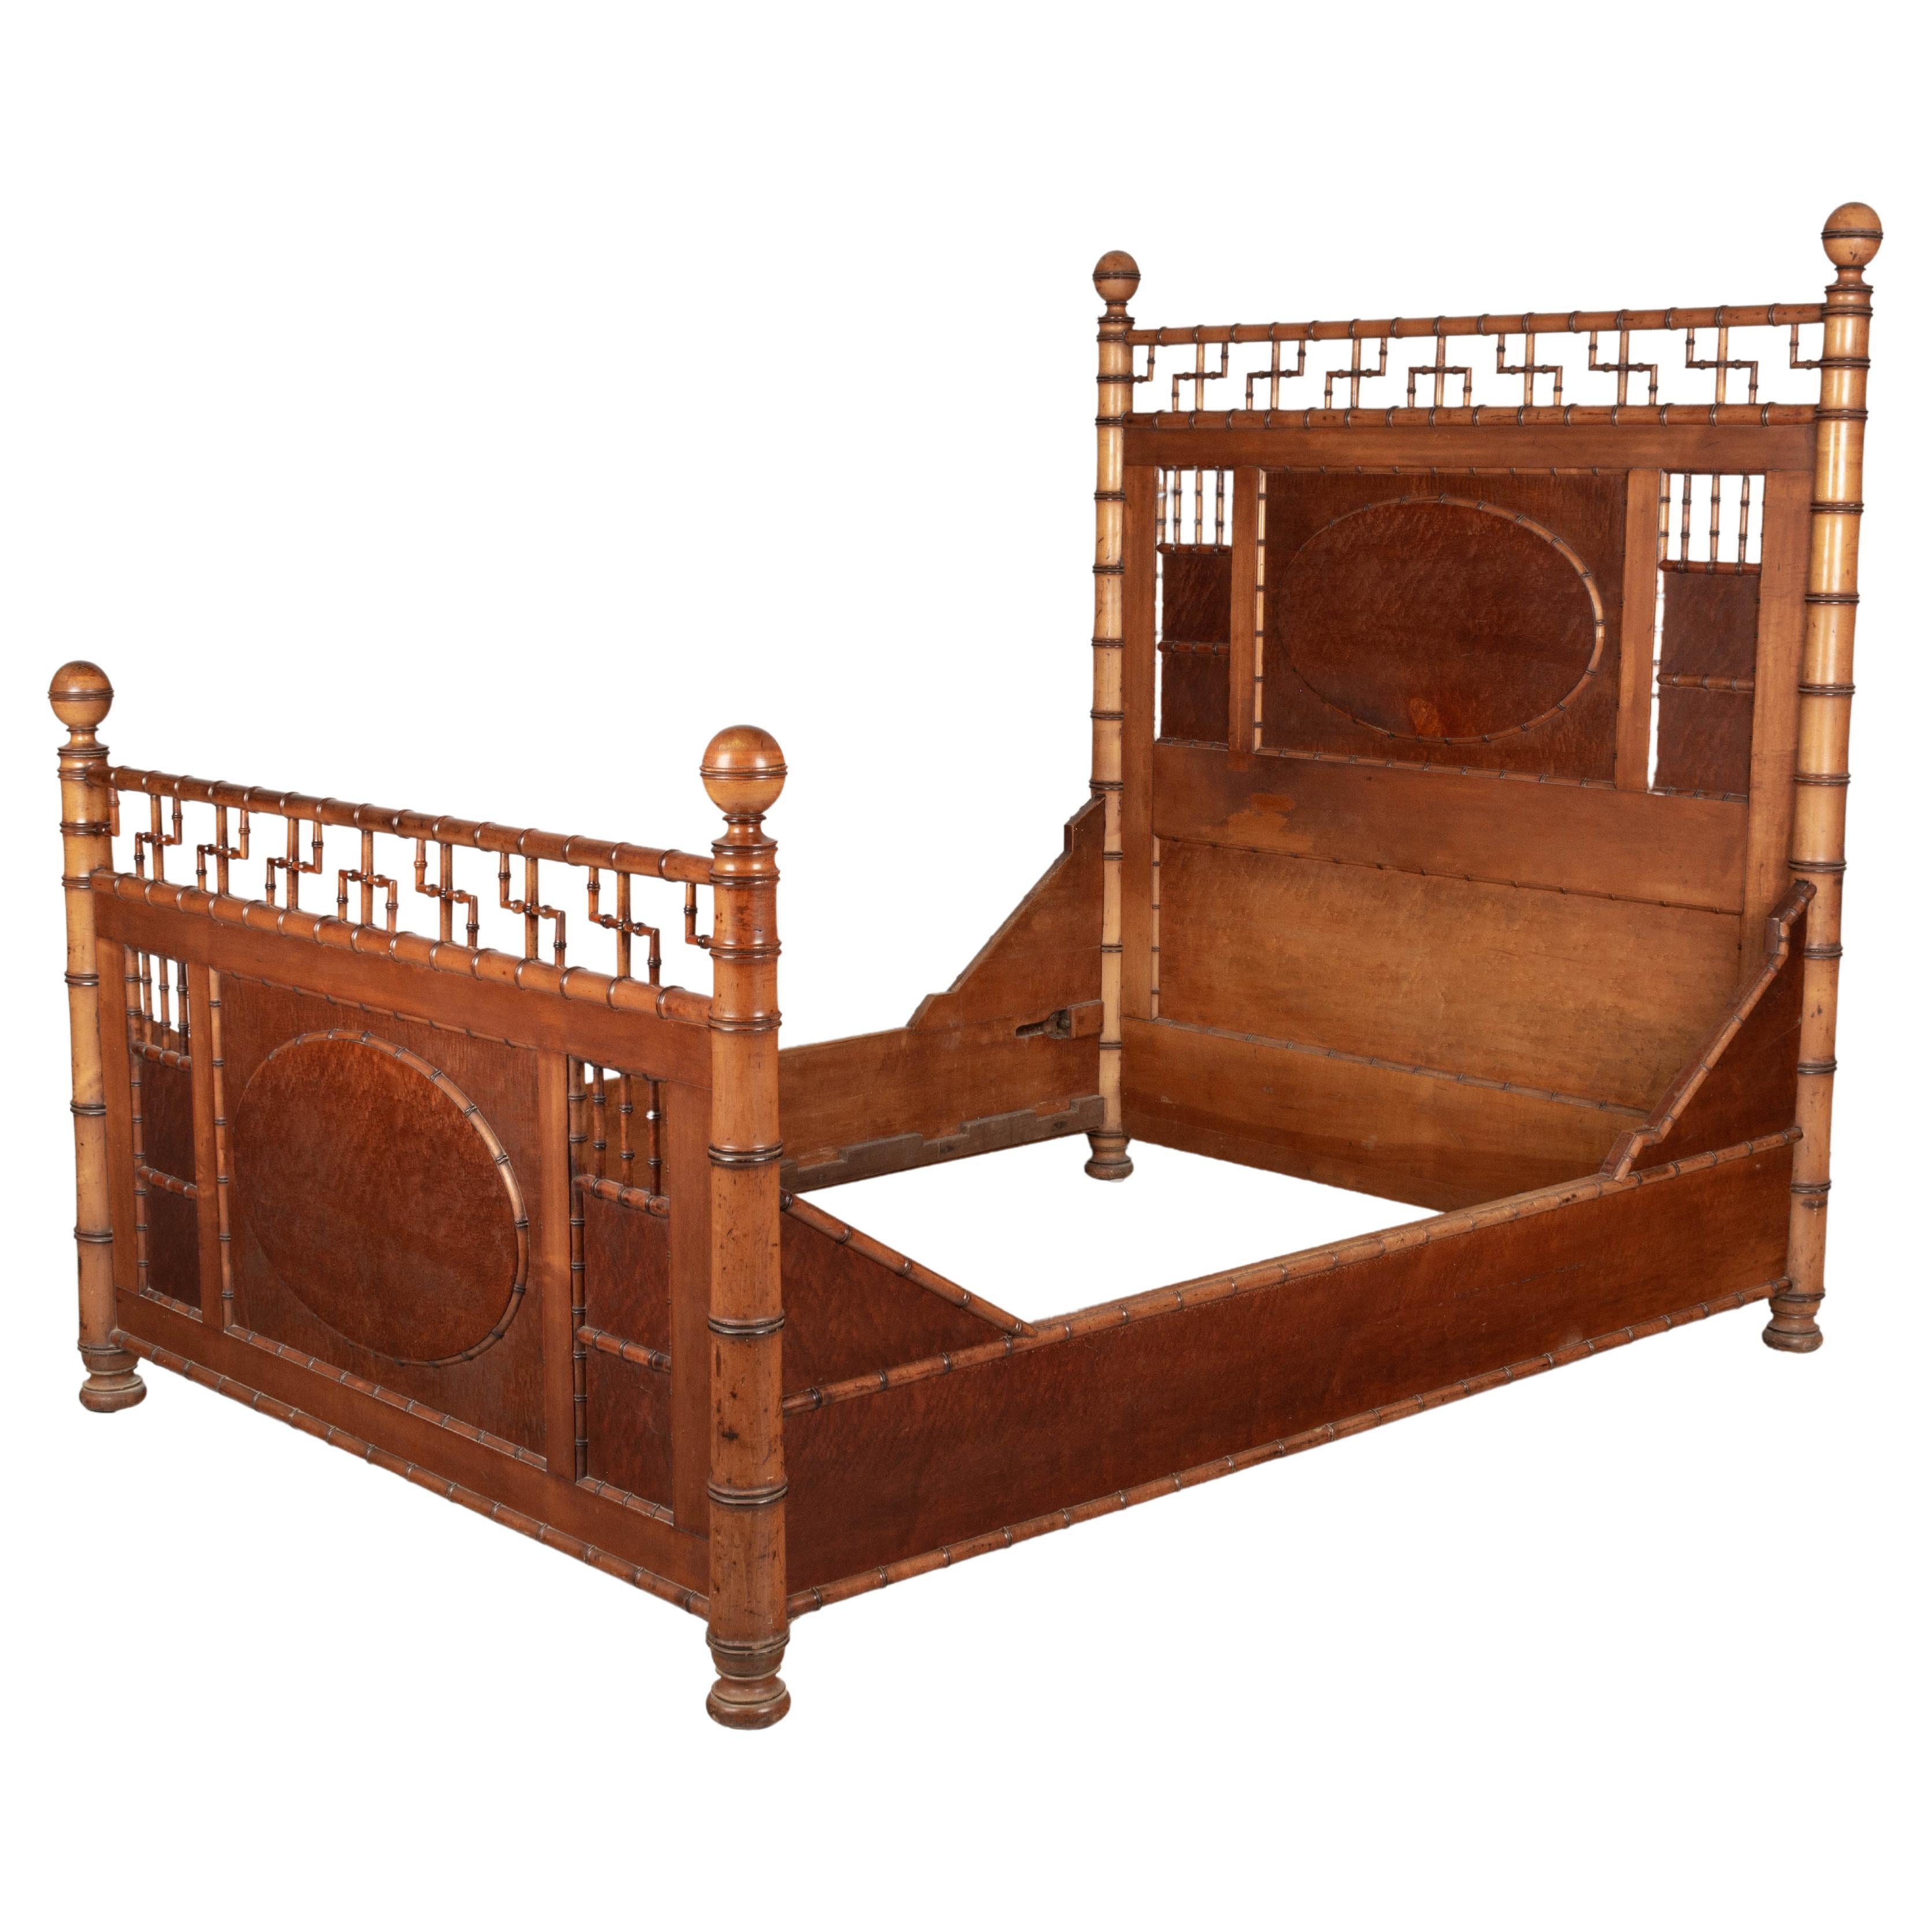 R.J. Horner Aesthetic Movement Faux Bamboo Bed